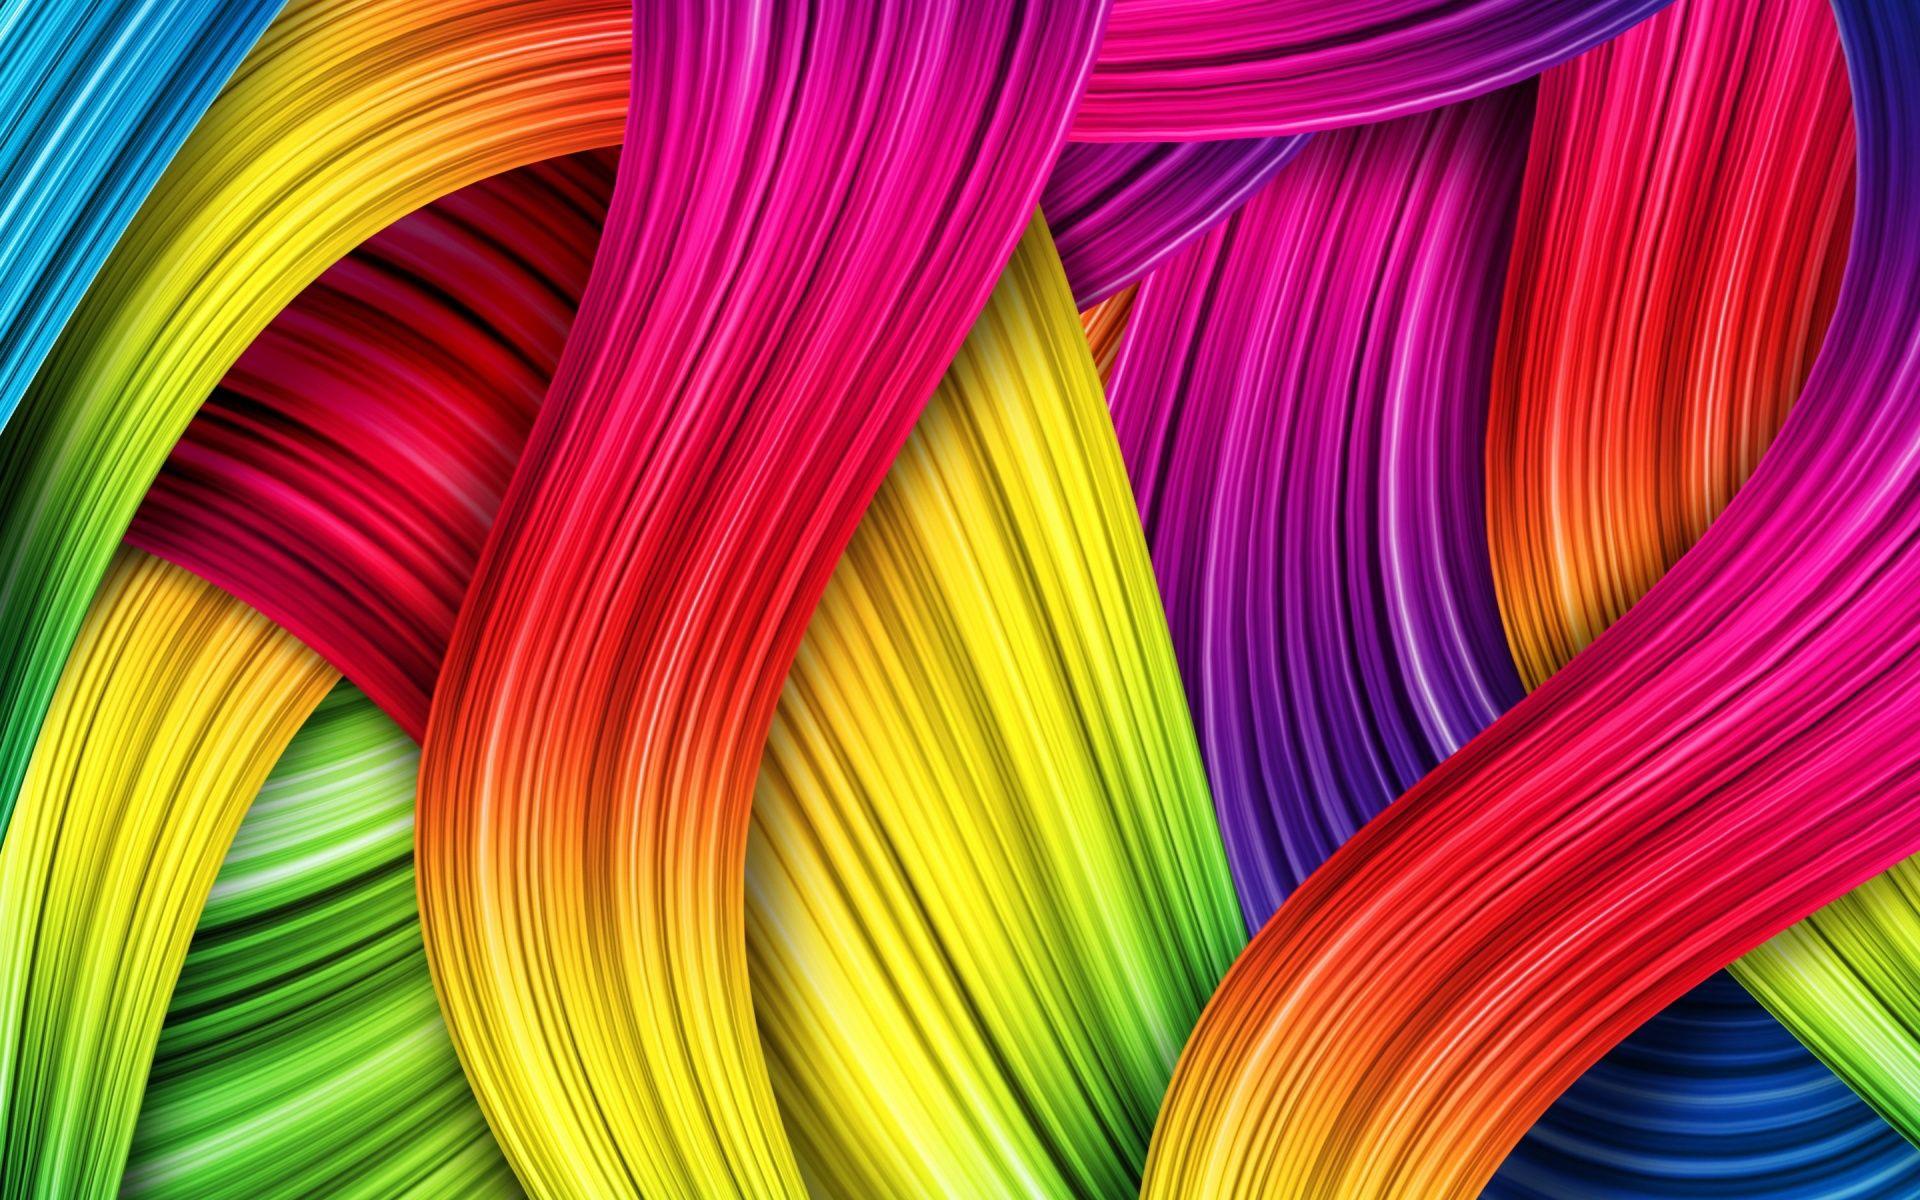 These wallpaper are so colorful even more colorful than the rainbow